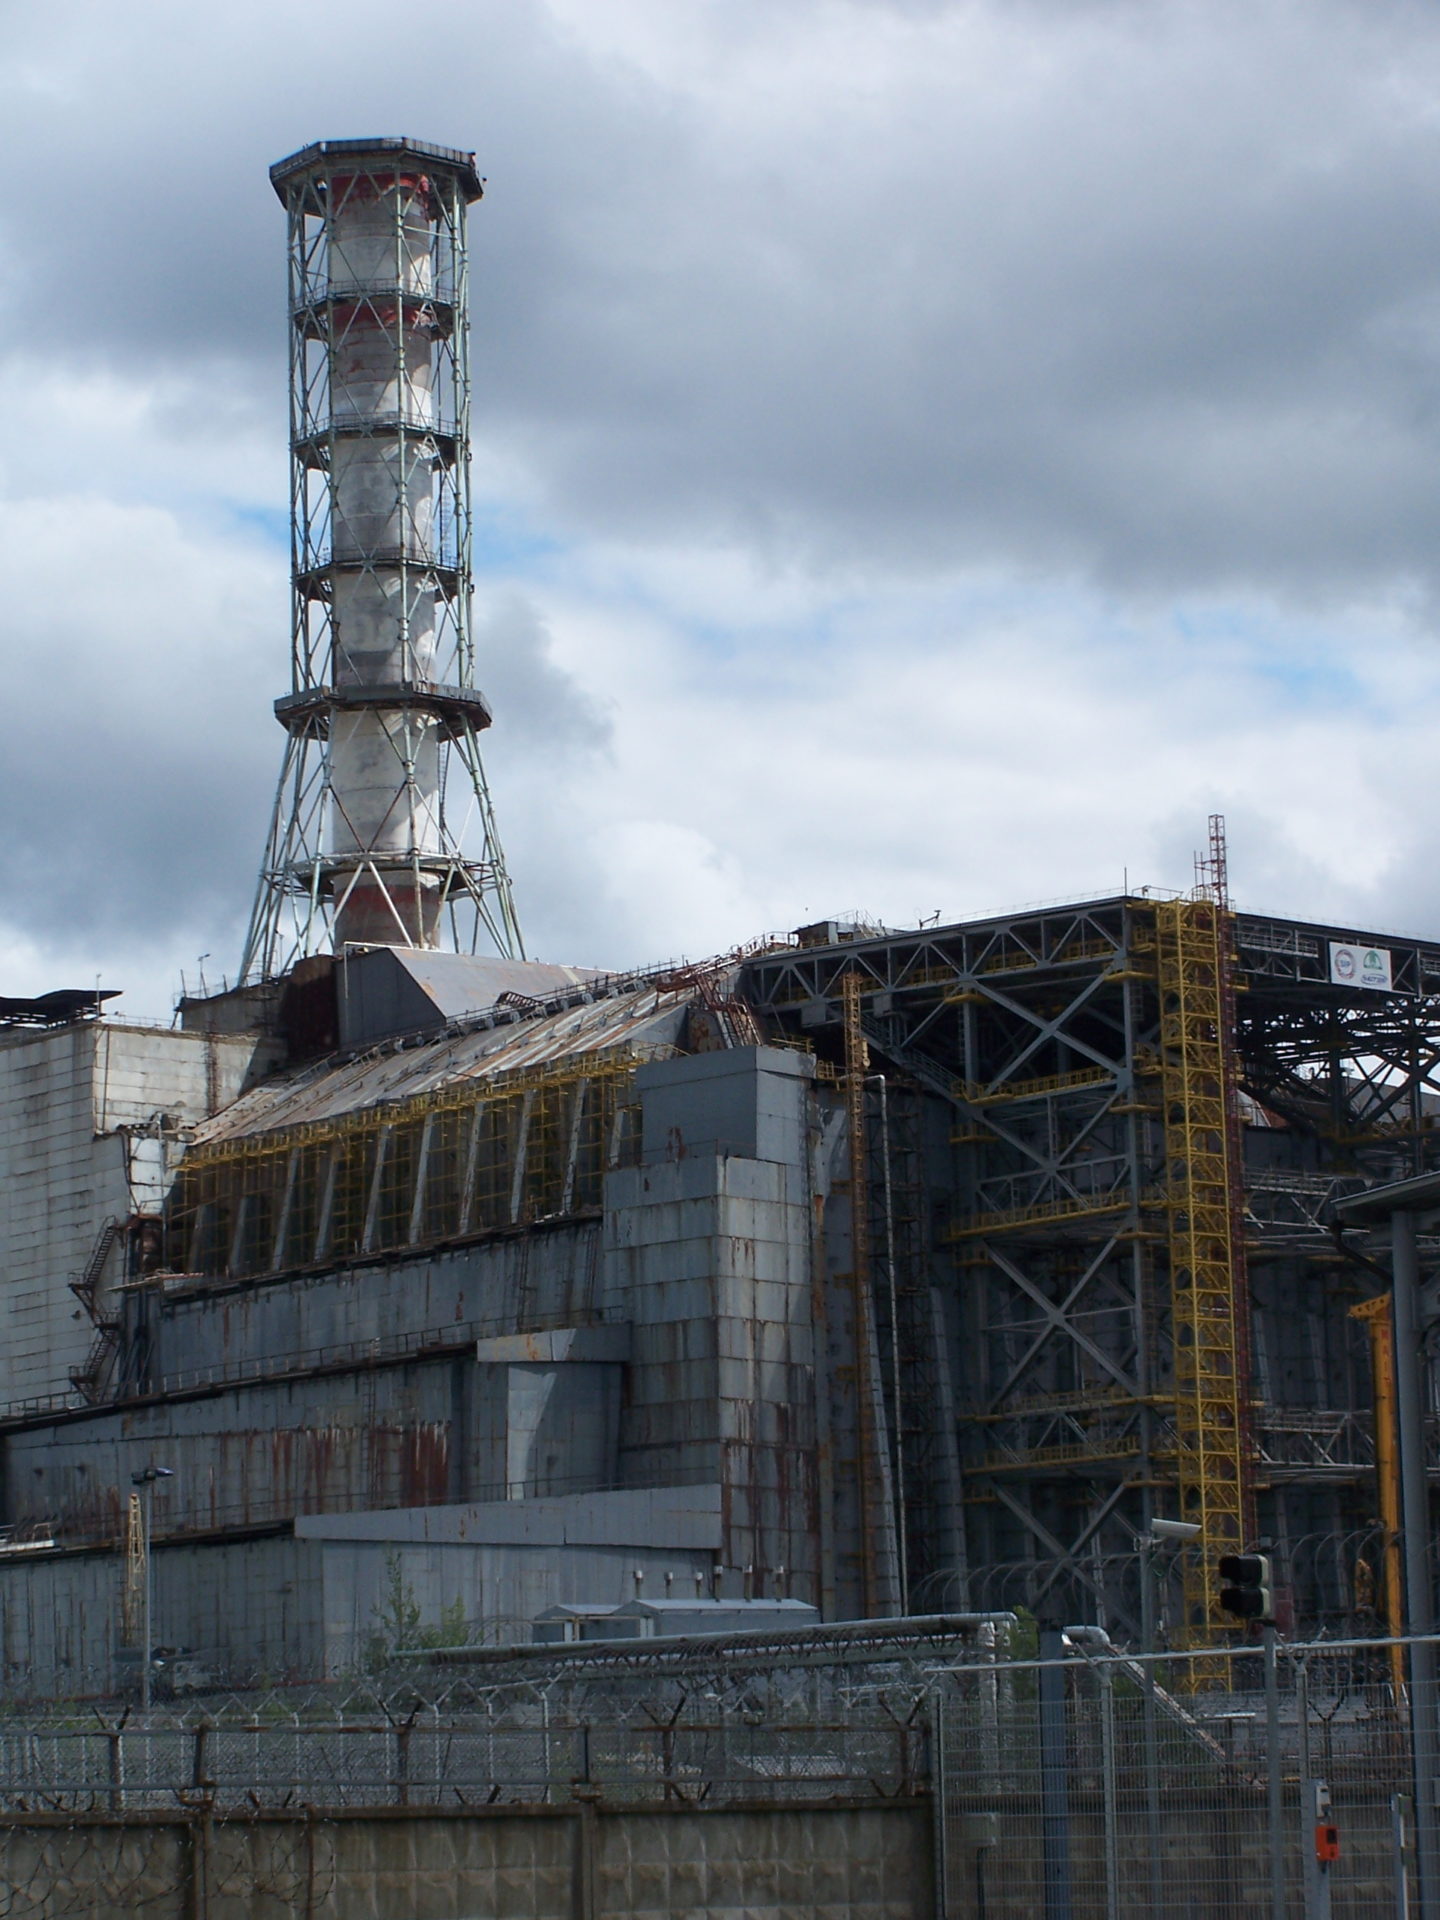 Chernobyl reactor No.4 - in 2009 you could still see the original concrete sarcophagus 